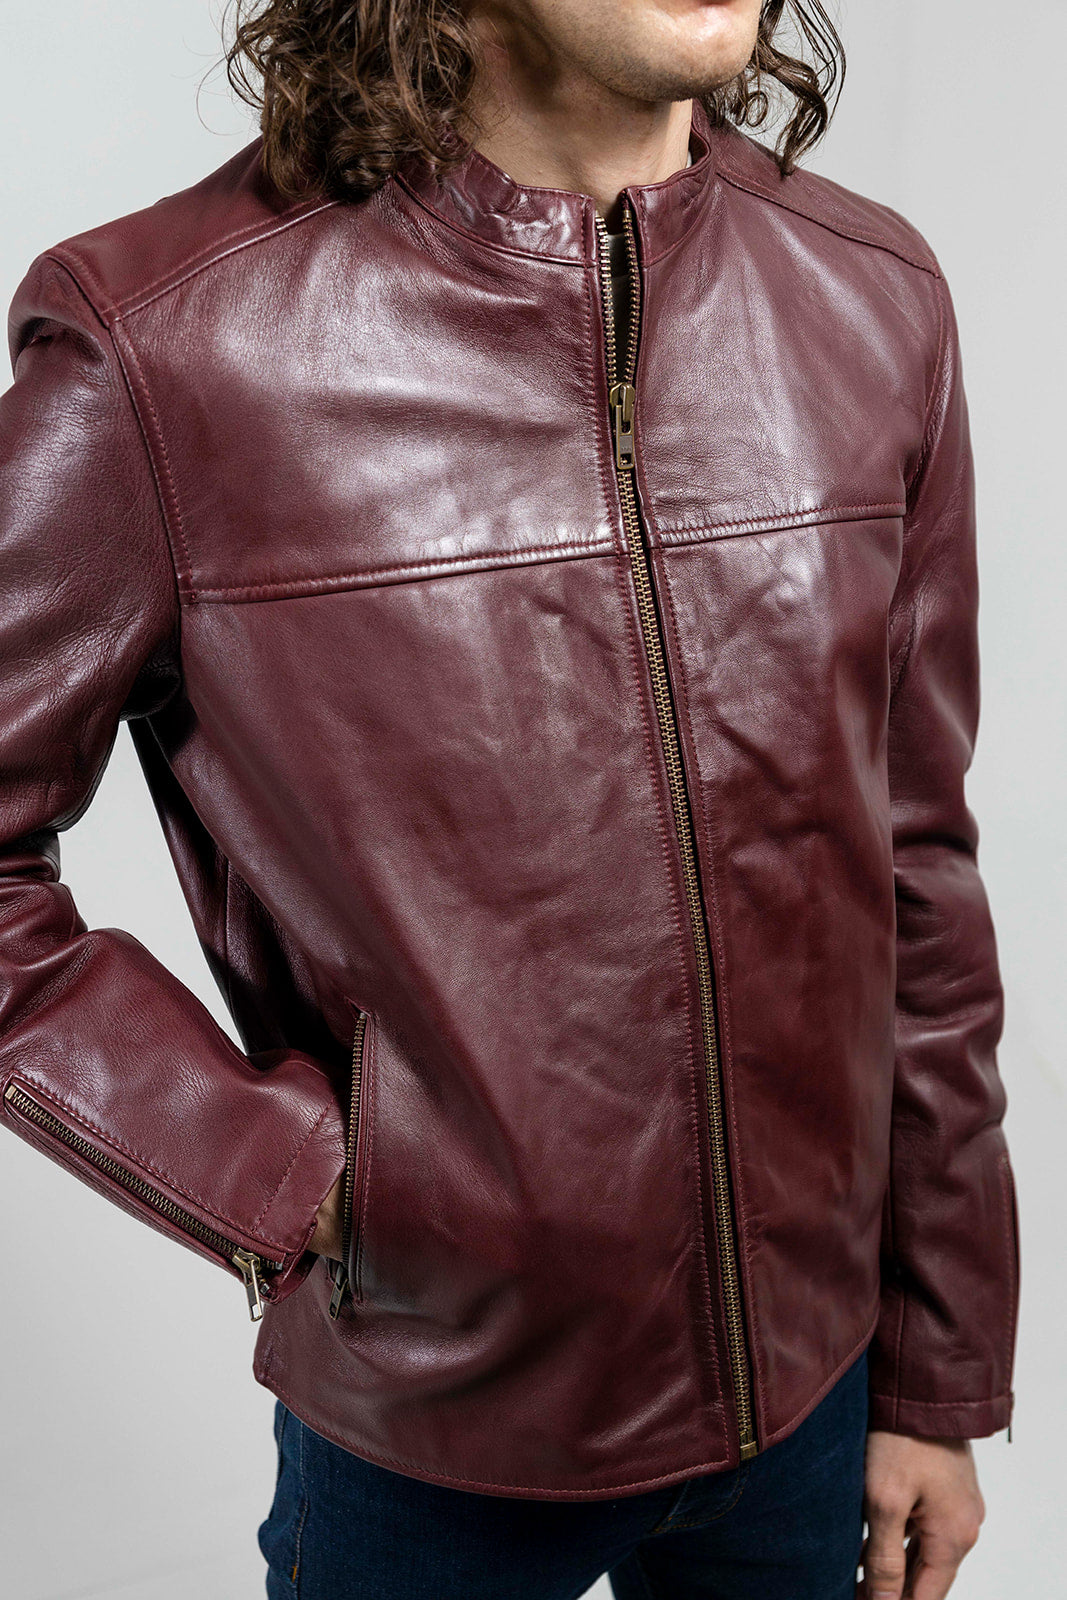 Lambskin First Leather Grayson (Oxblood) Fashion - Manufacturing Company – Men\'s Jacket